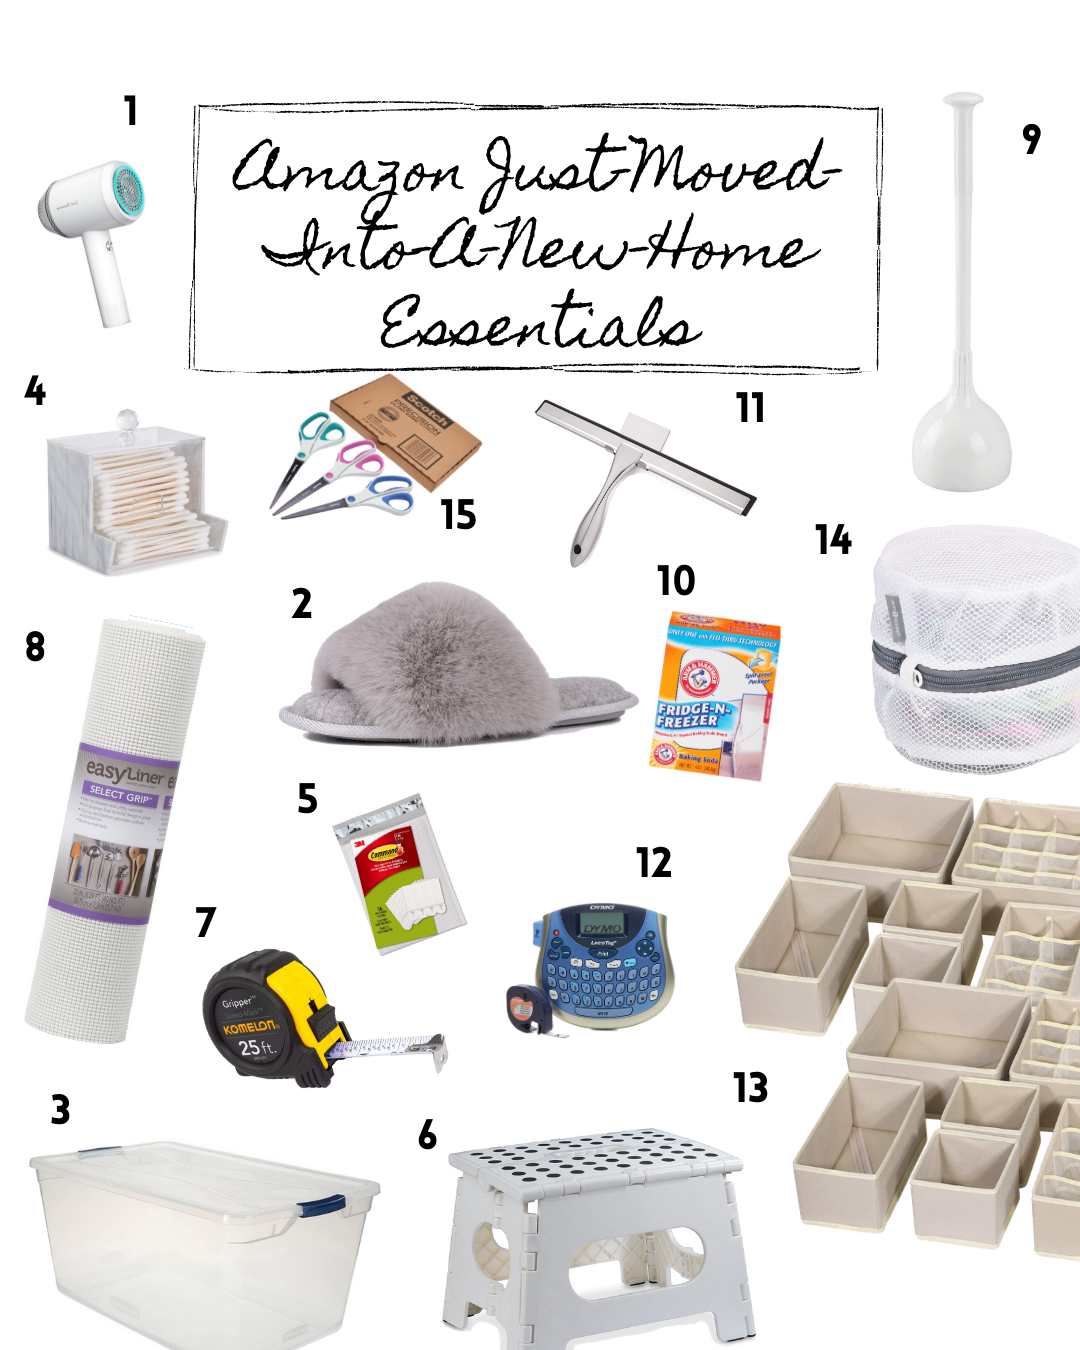 Just-Moved-Into-A-New-Home  Essentials — Missmisschelle